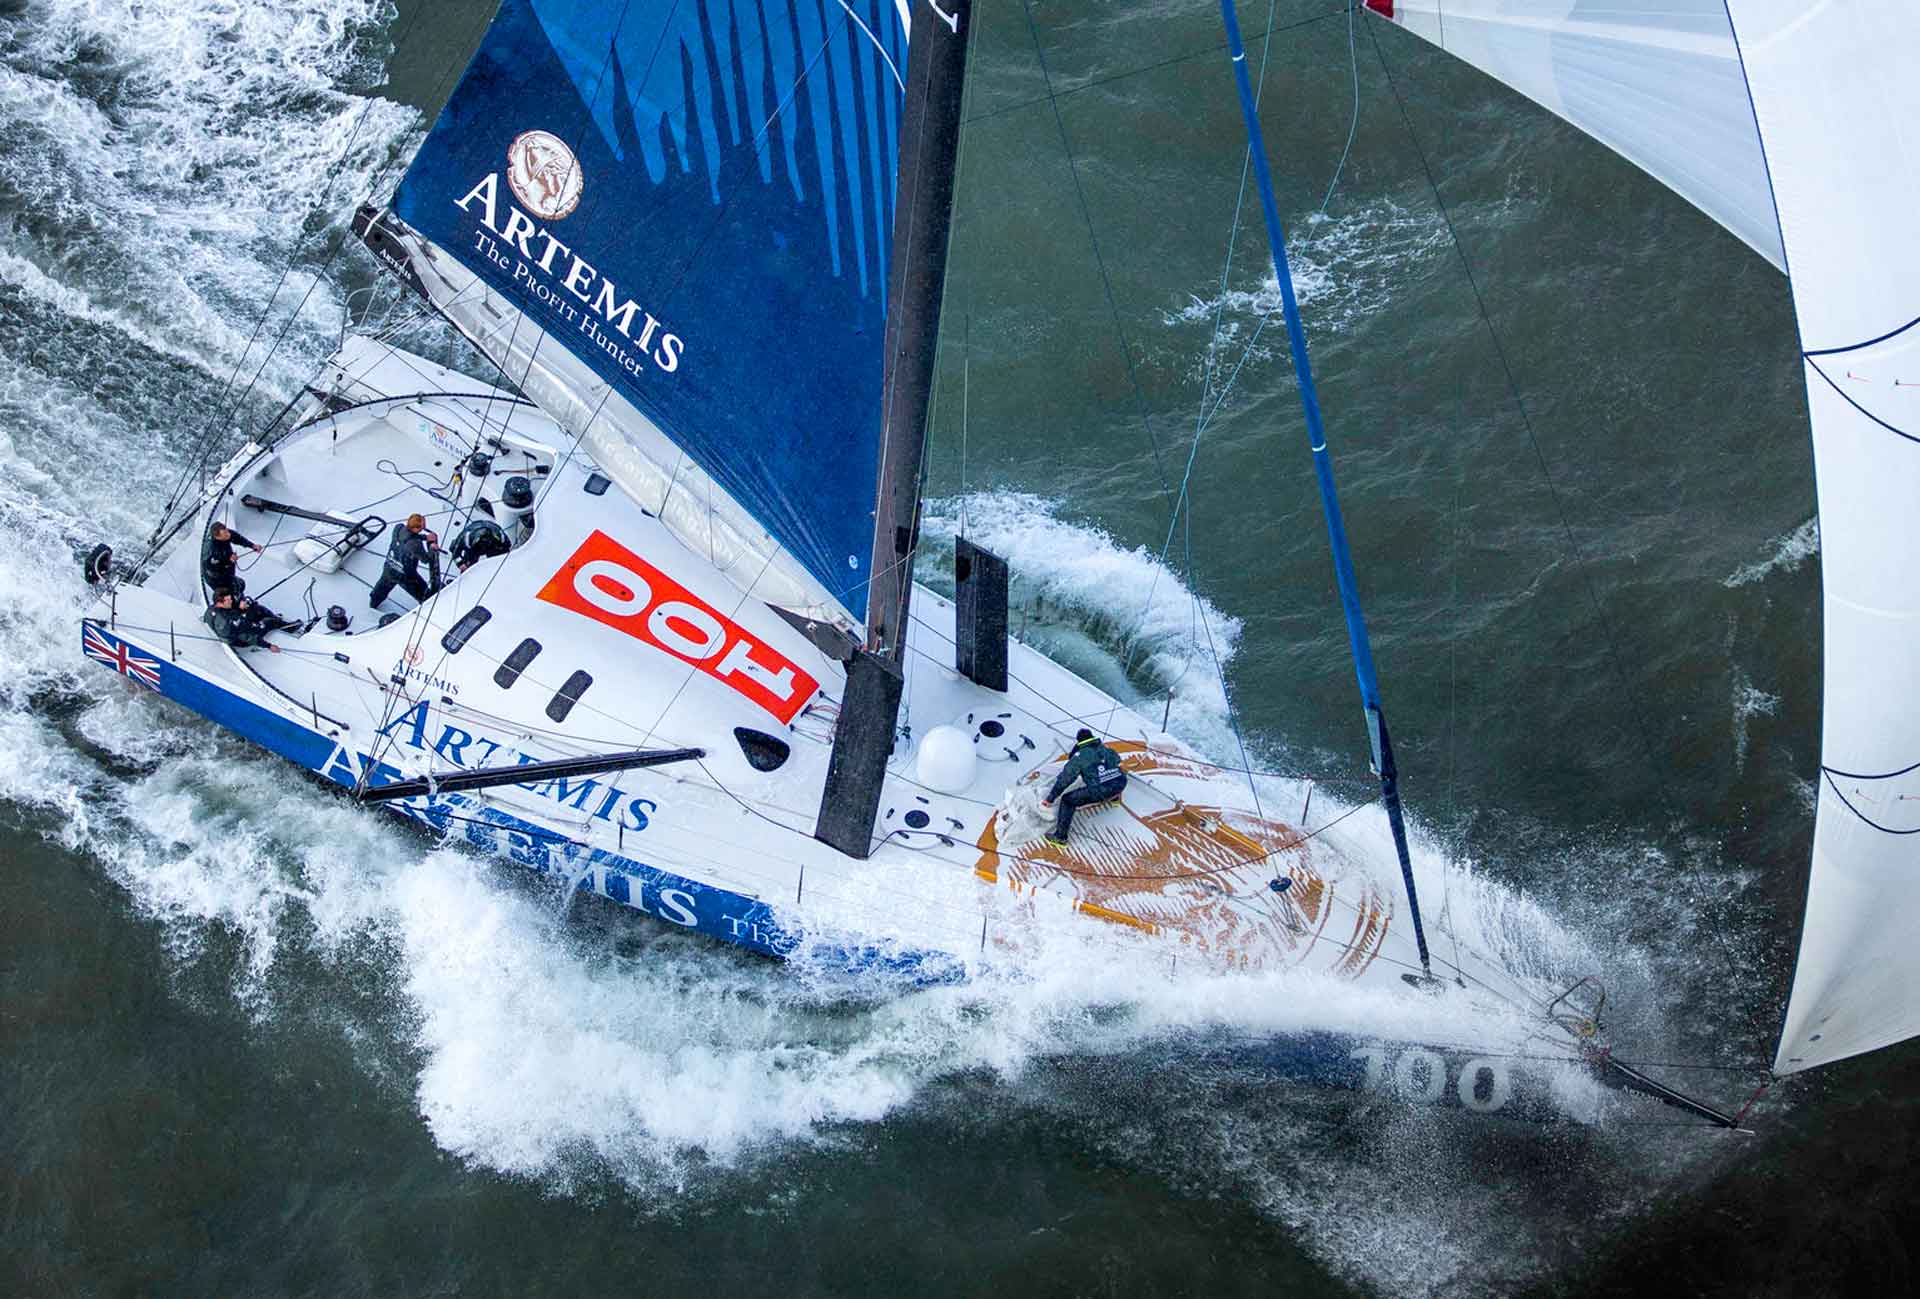 Daggerboards and massive Outriggers: This must be an IMOCA60